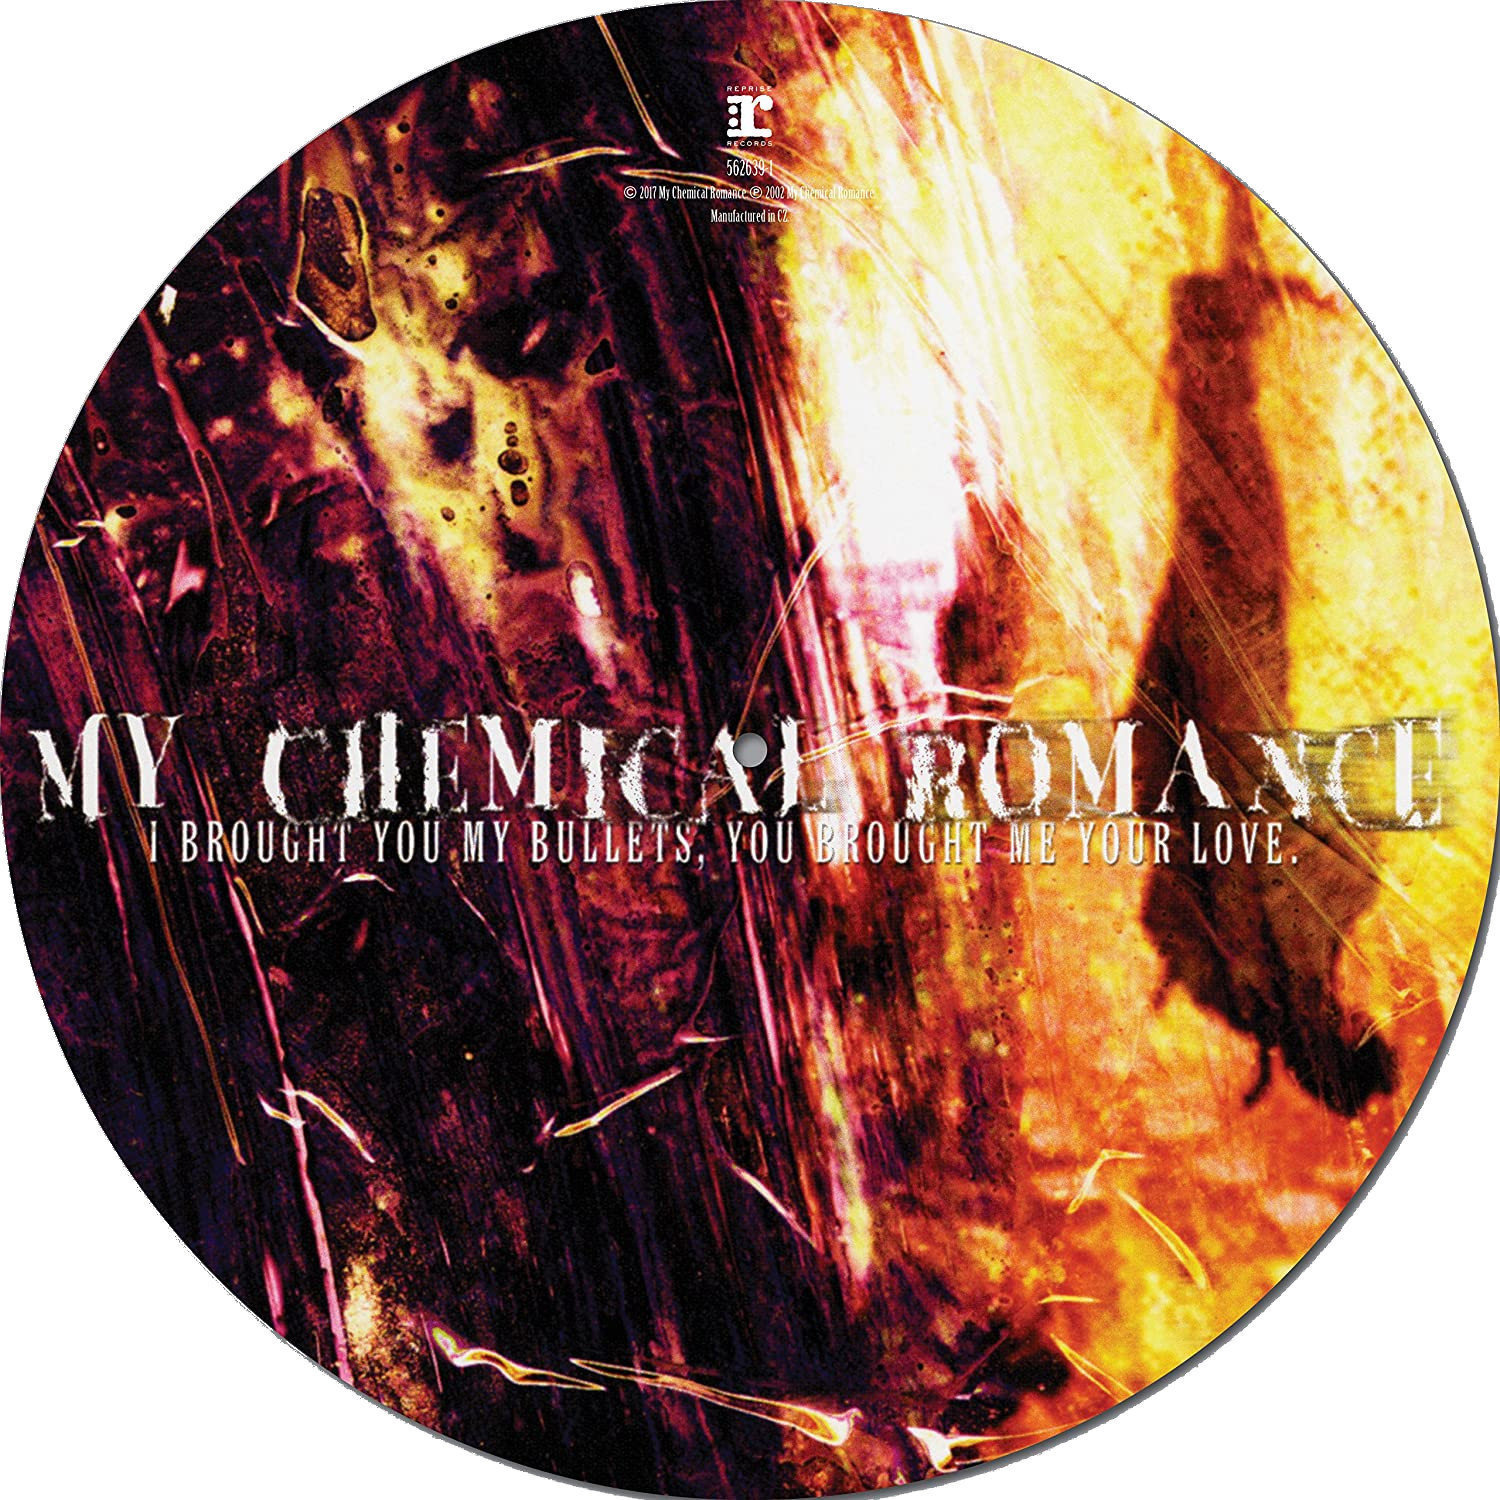 Vinylskiva My Chemical Romance - I Brought You My Bullets, You Brought Me Your Love (Picture Disc) (LP)